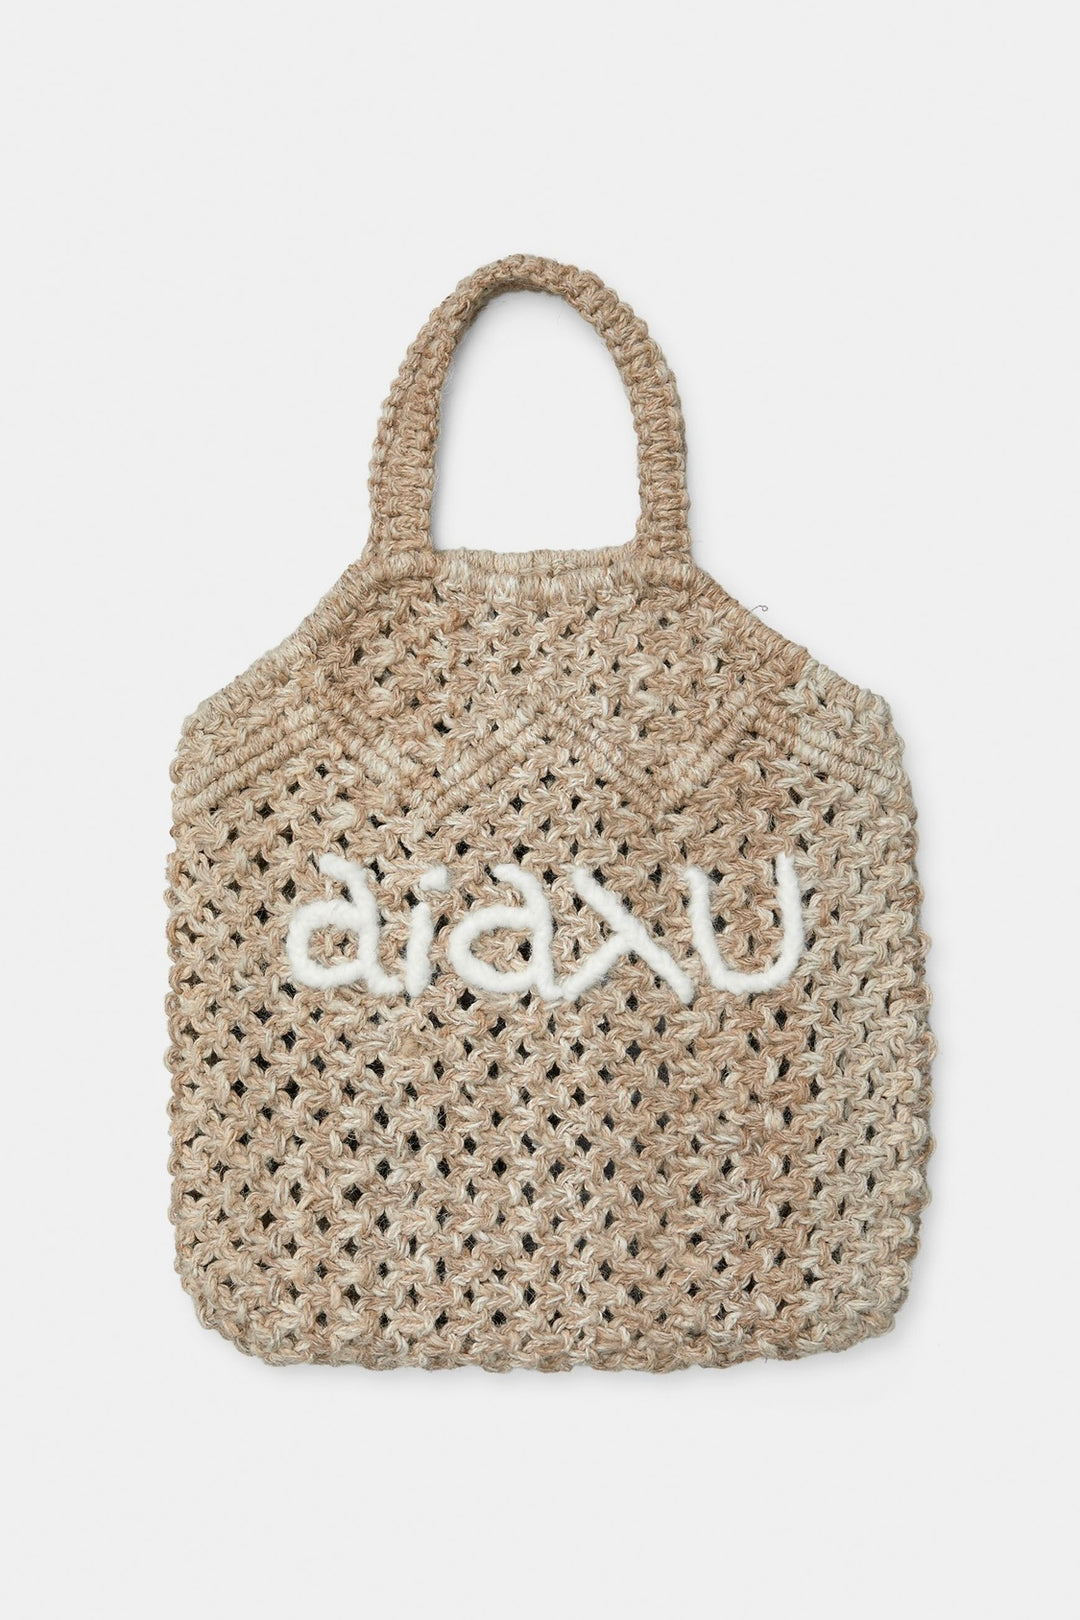 Aiayu - Himalayan Nettle Bag Natural Off White